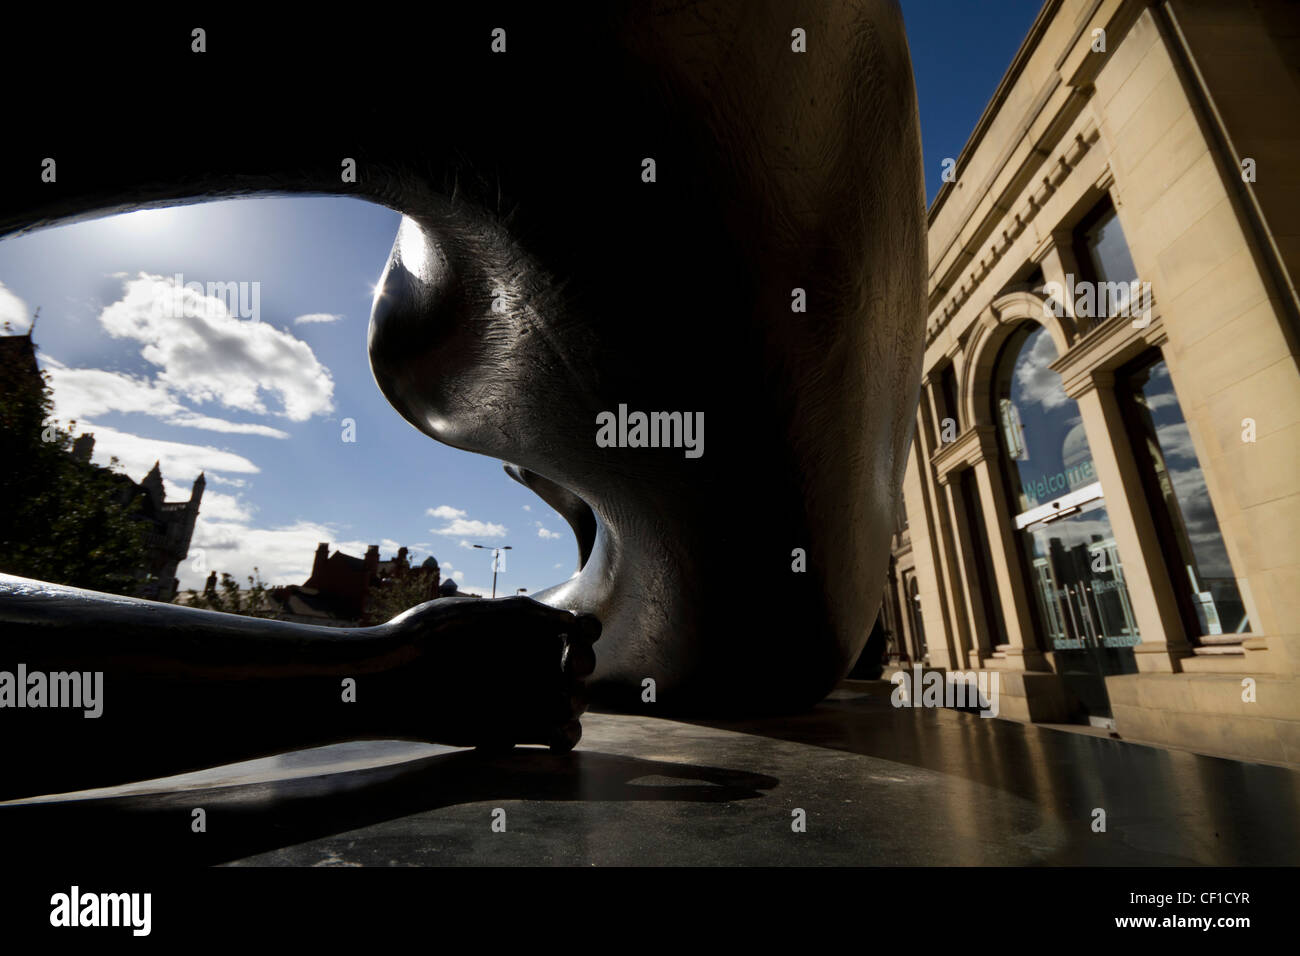 A sculpture by Henry Moore, Reclining Woman: Elbow 1981, on display outside Leeds City Art Gallery. Stock Photo